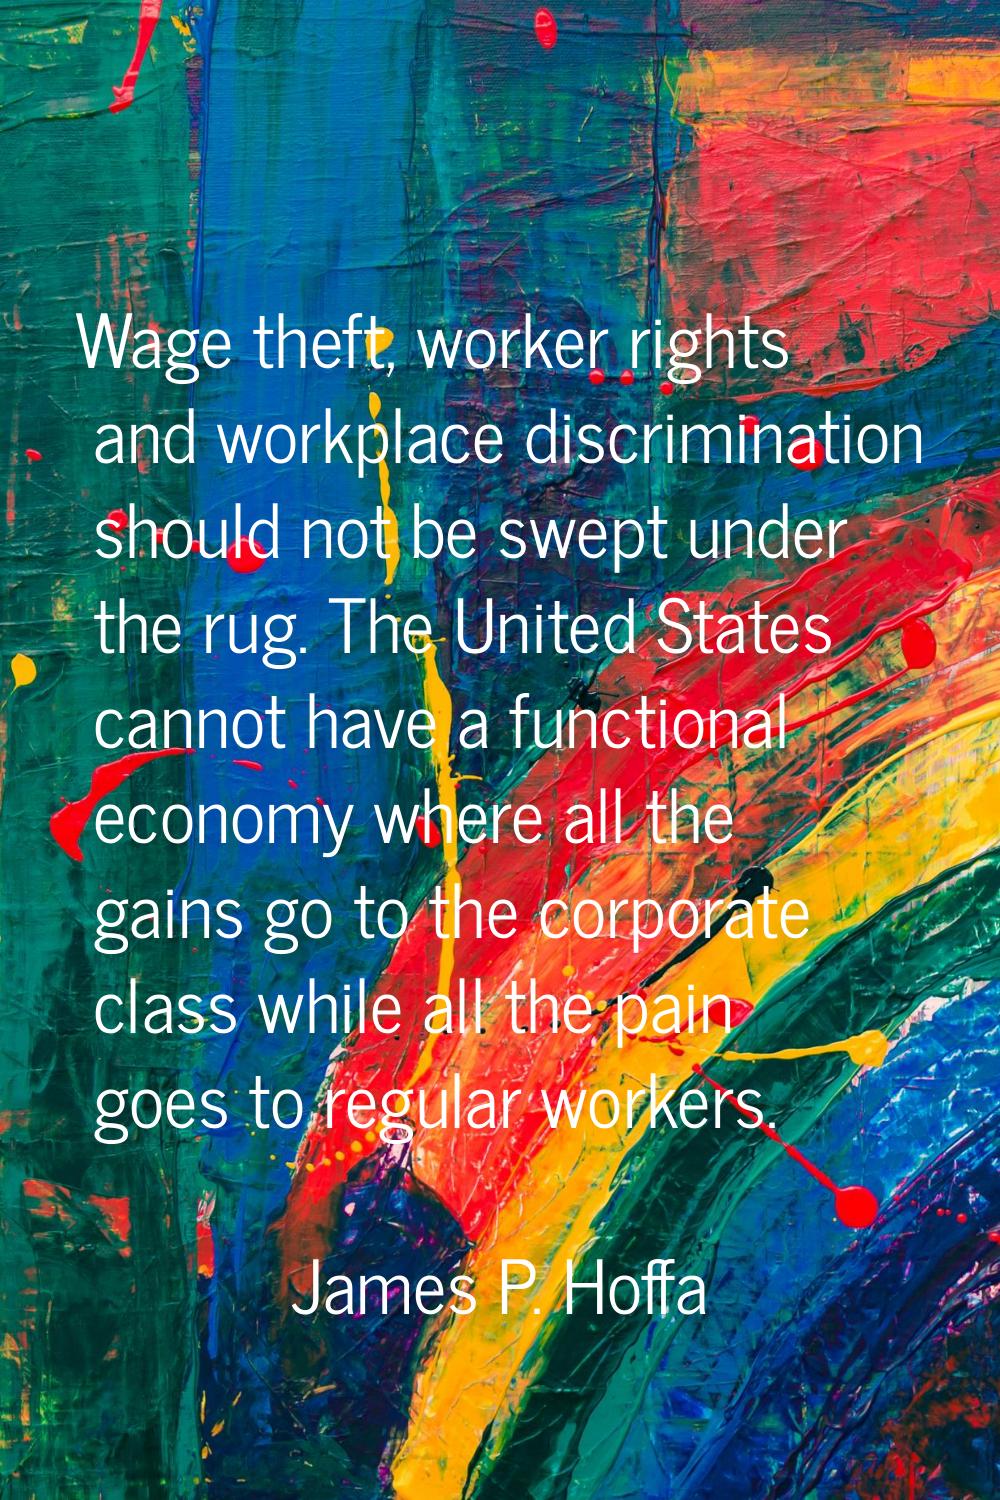 Wage theft, worker rights and workplace discrimination should not be swept under the rug. The Unite